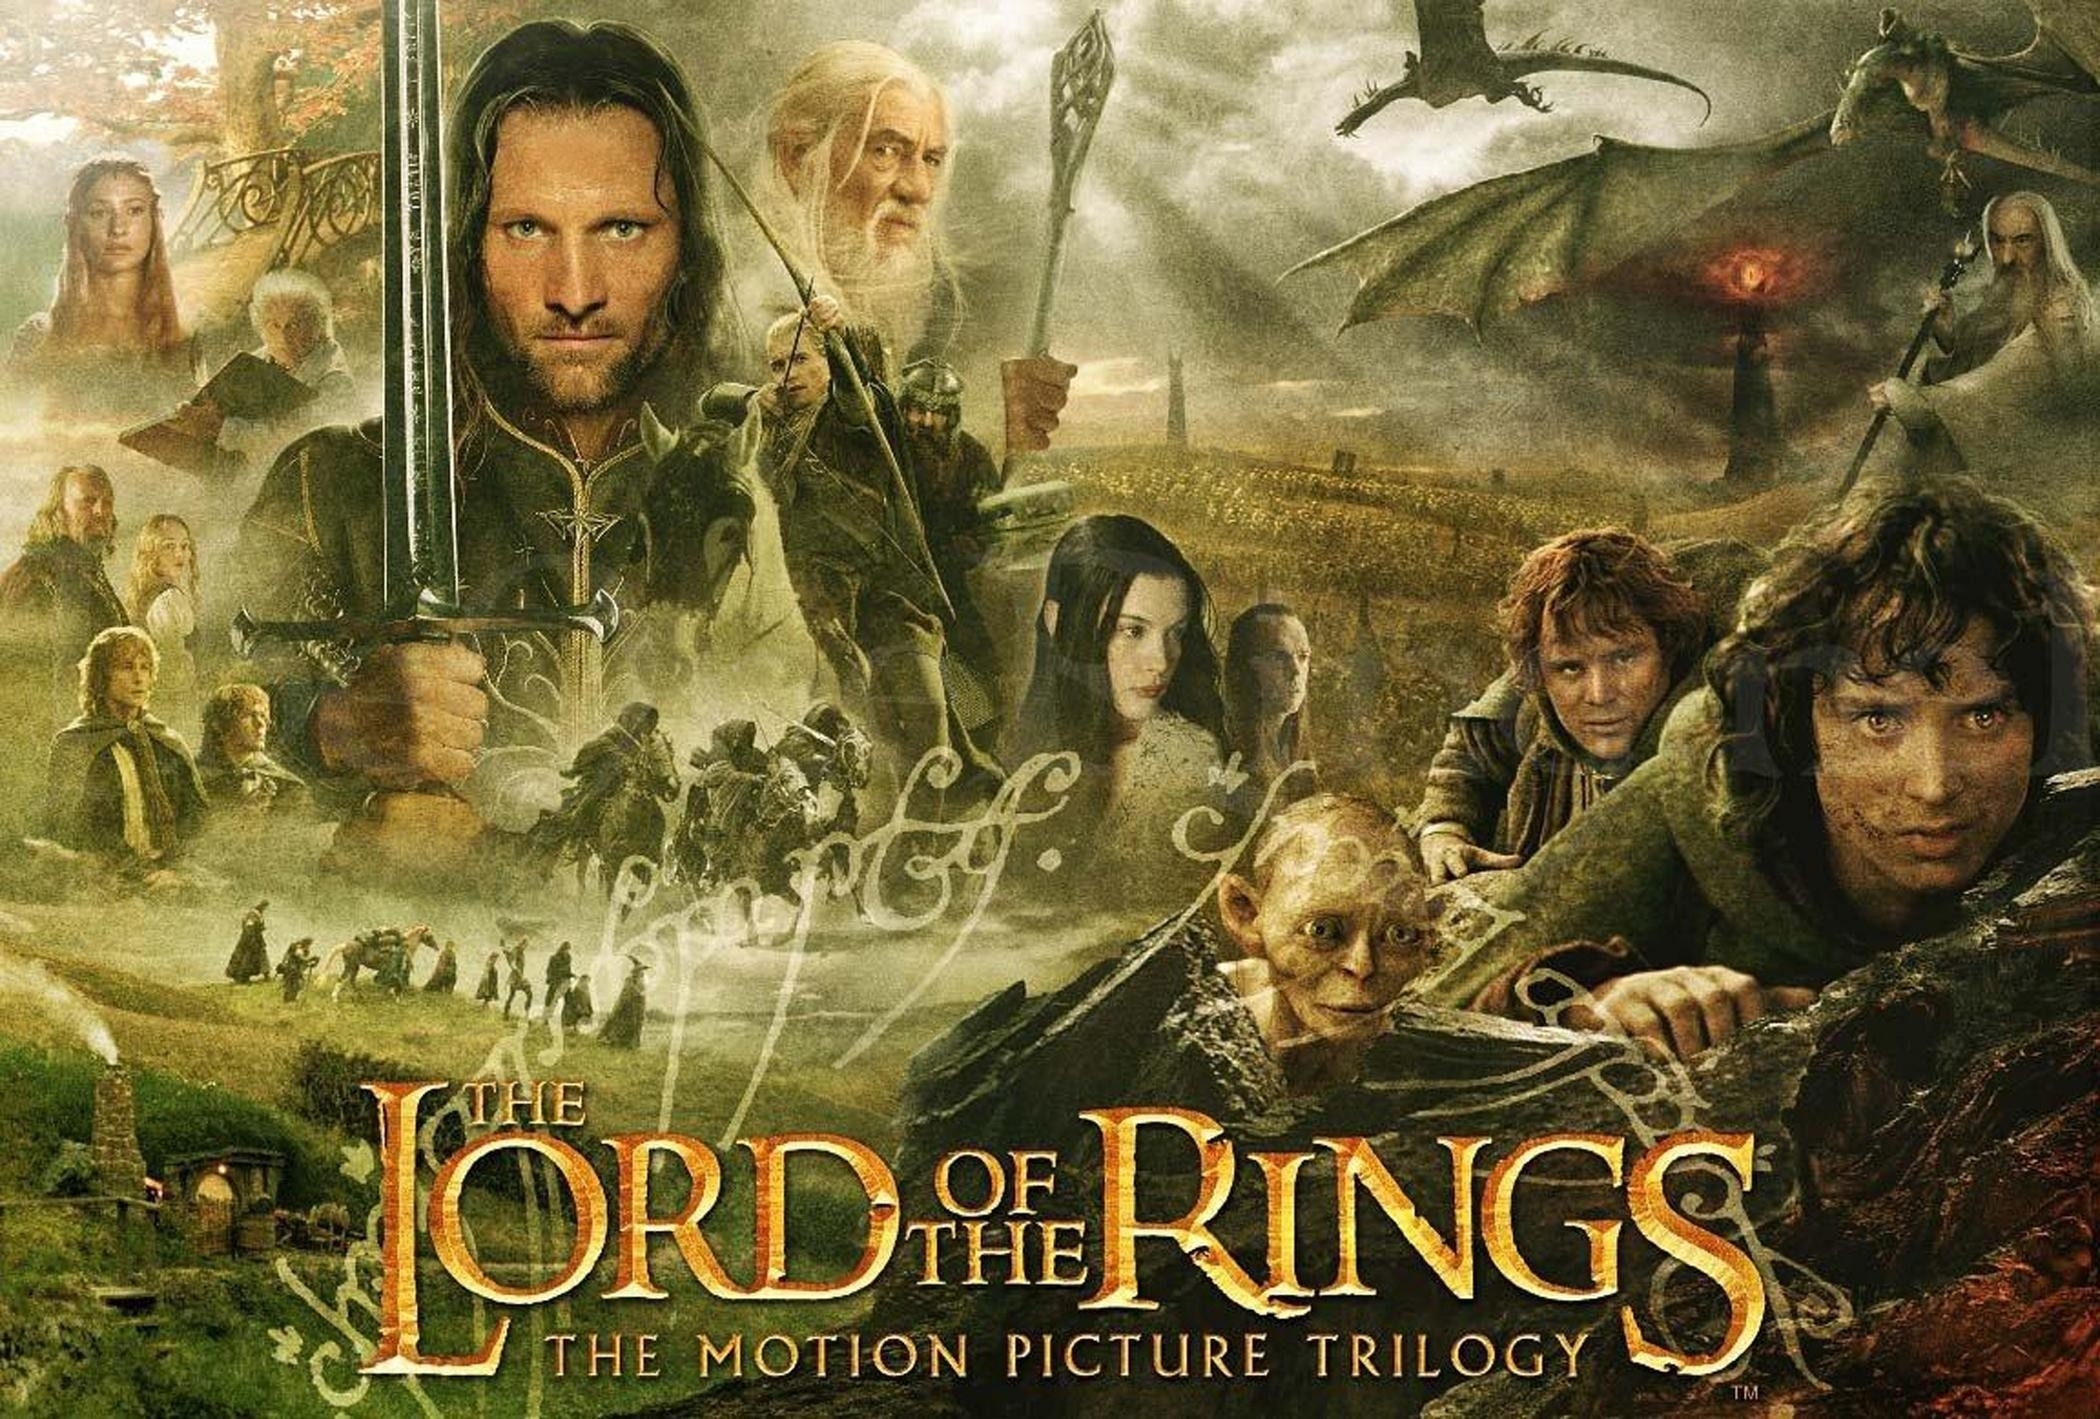 Analysis of The Lord of the Rings: The of King – Theory and